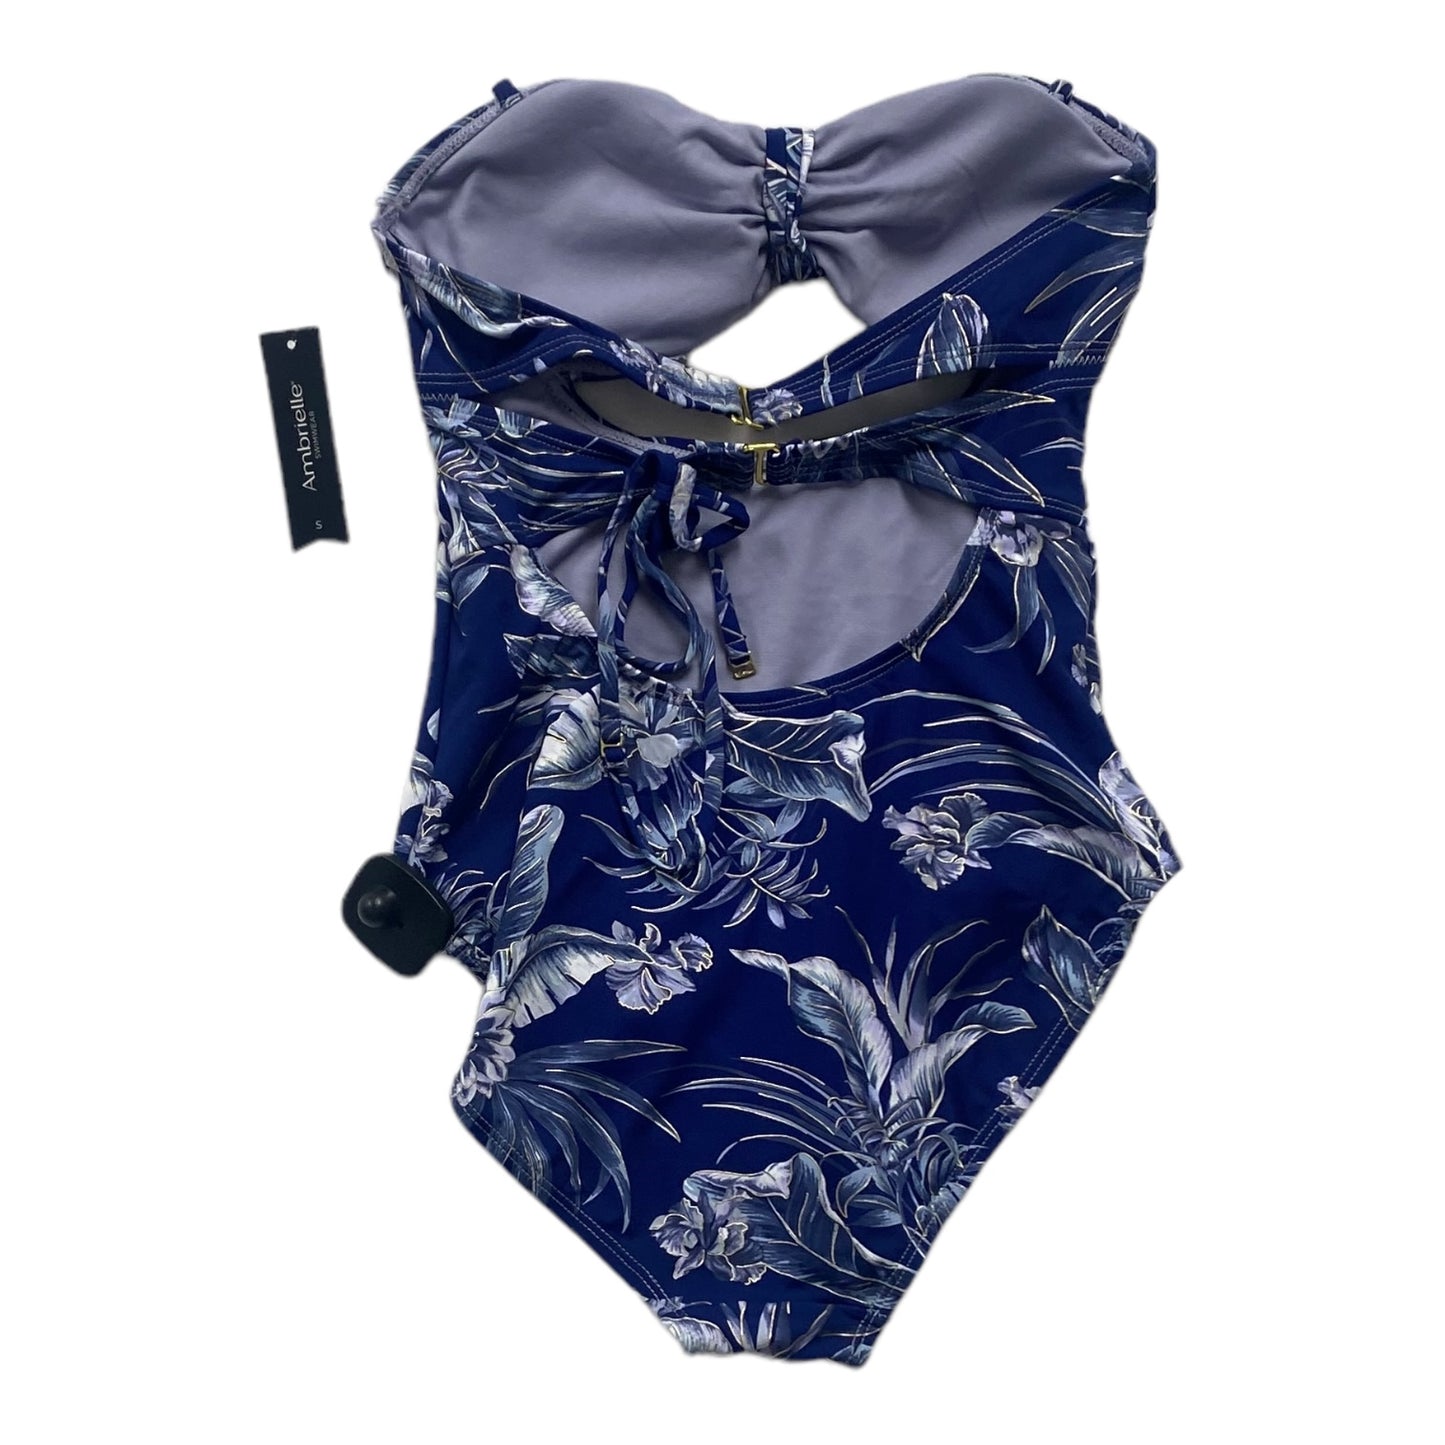 Swimsuit By AMBRIELLE  Size: S